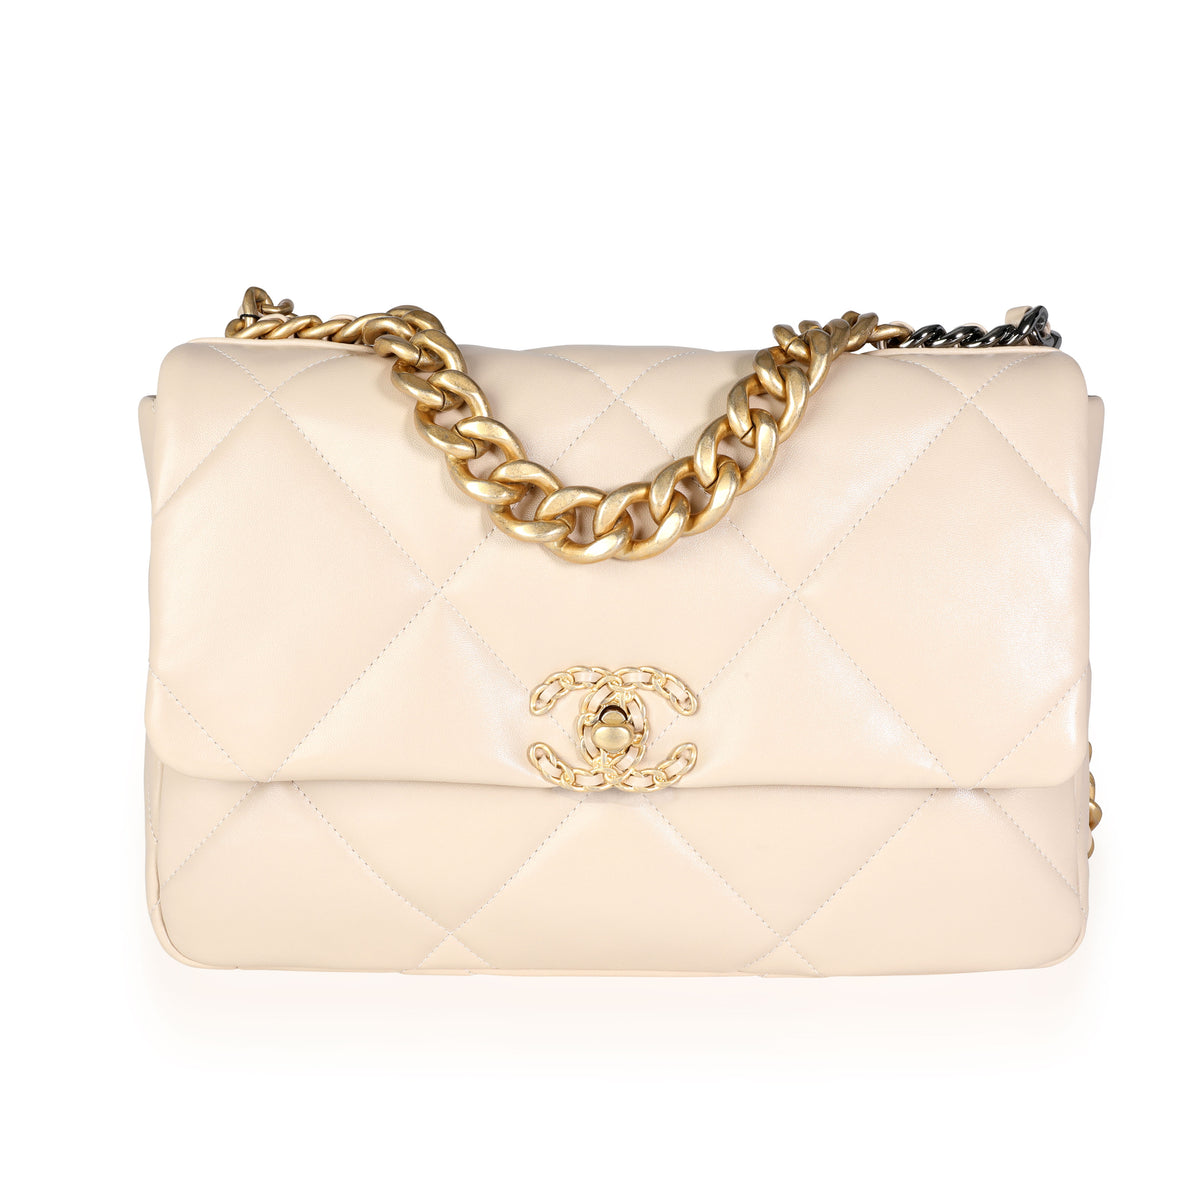 Chanel Beige Quilted Lambskin Large Chanel 19 Bag, myGemma, NL